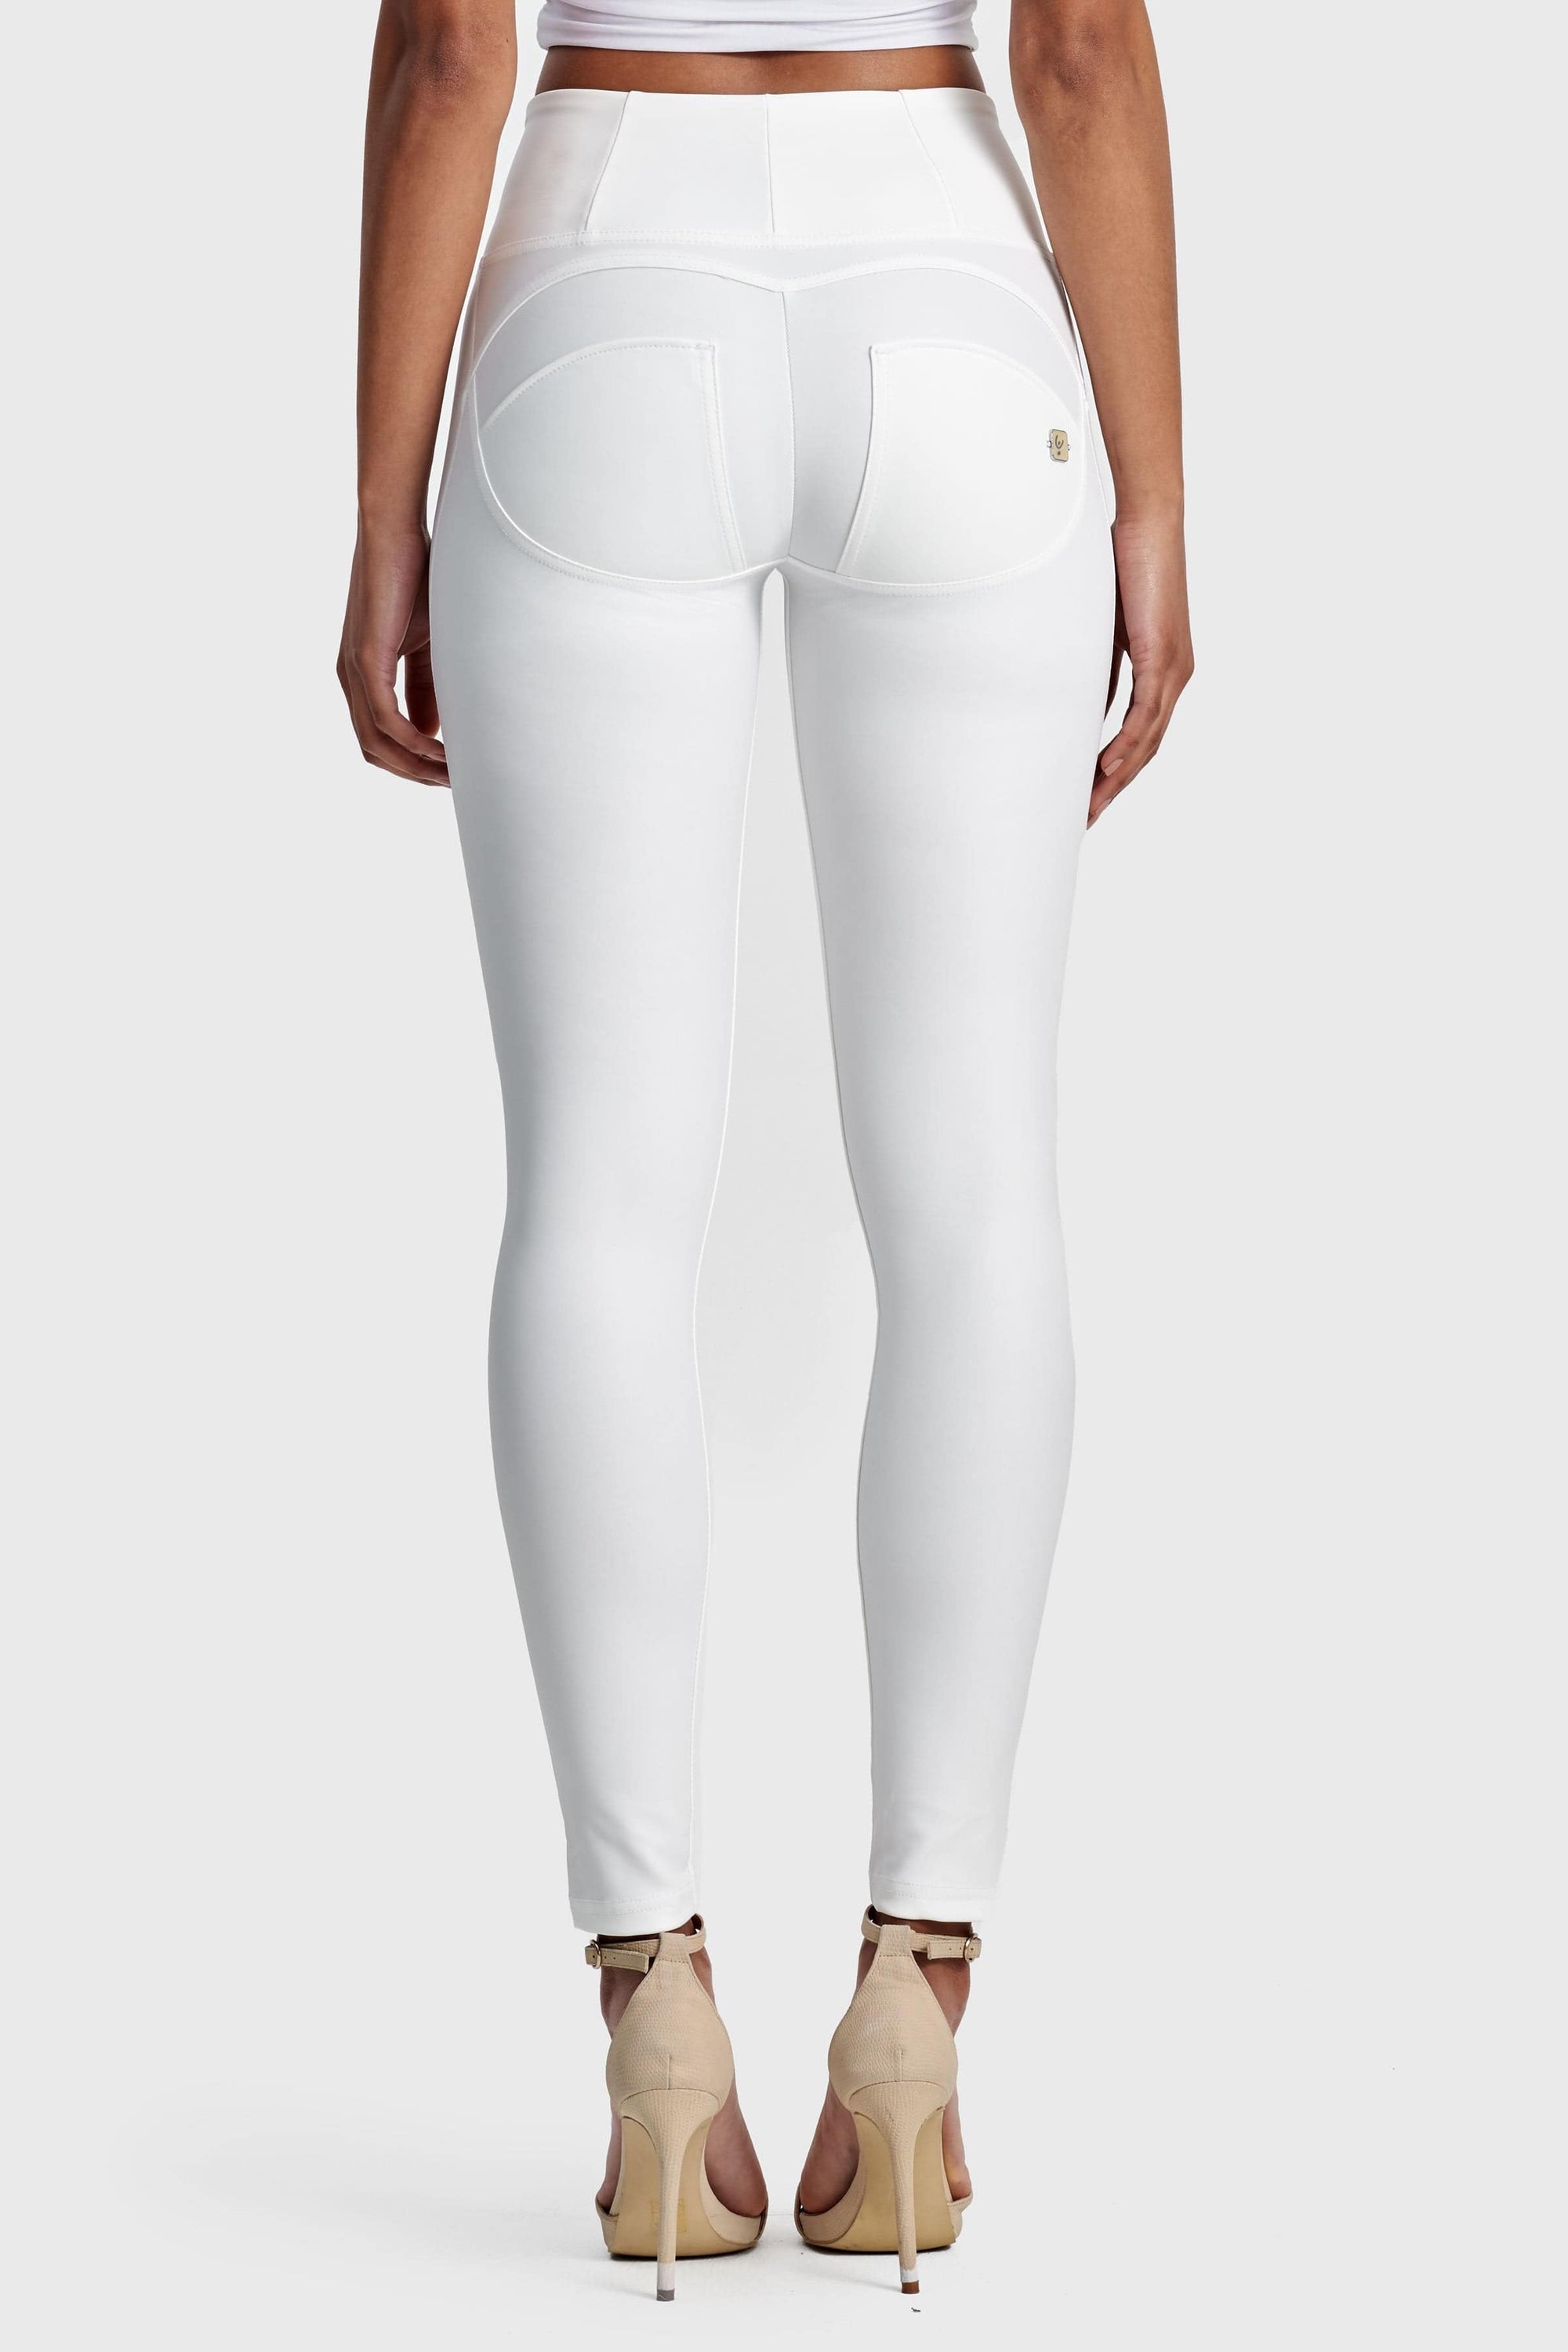 WR.UP® Faux Leather - High Waisted - Full Length - White 12